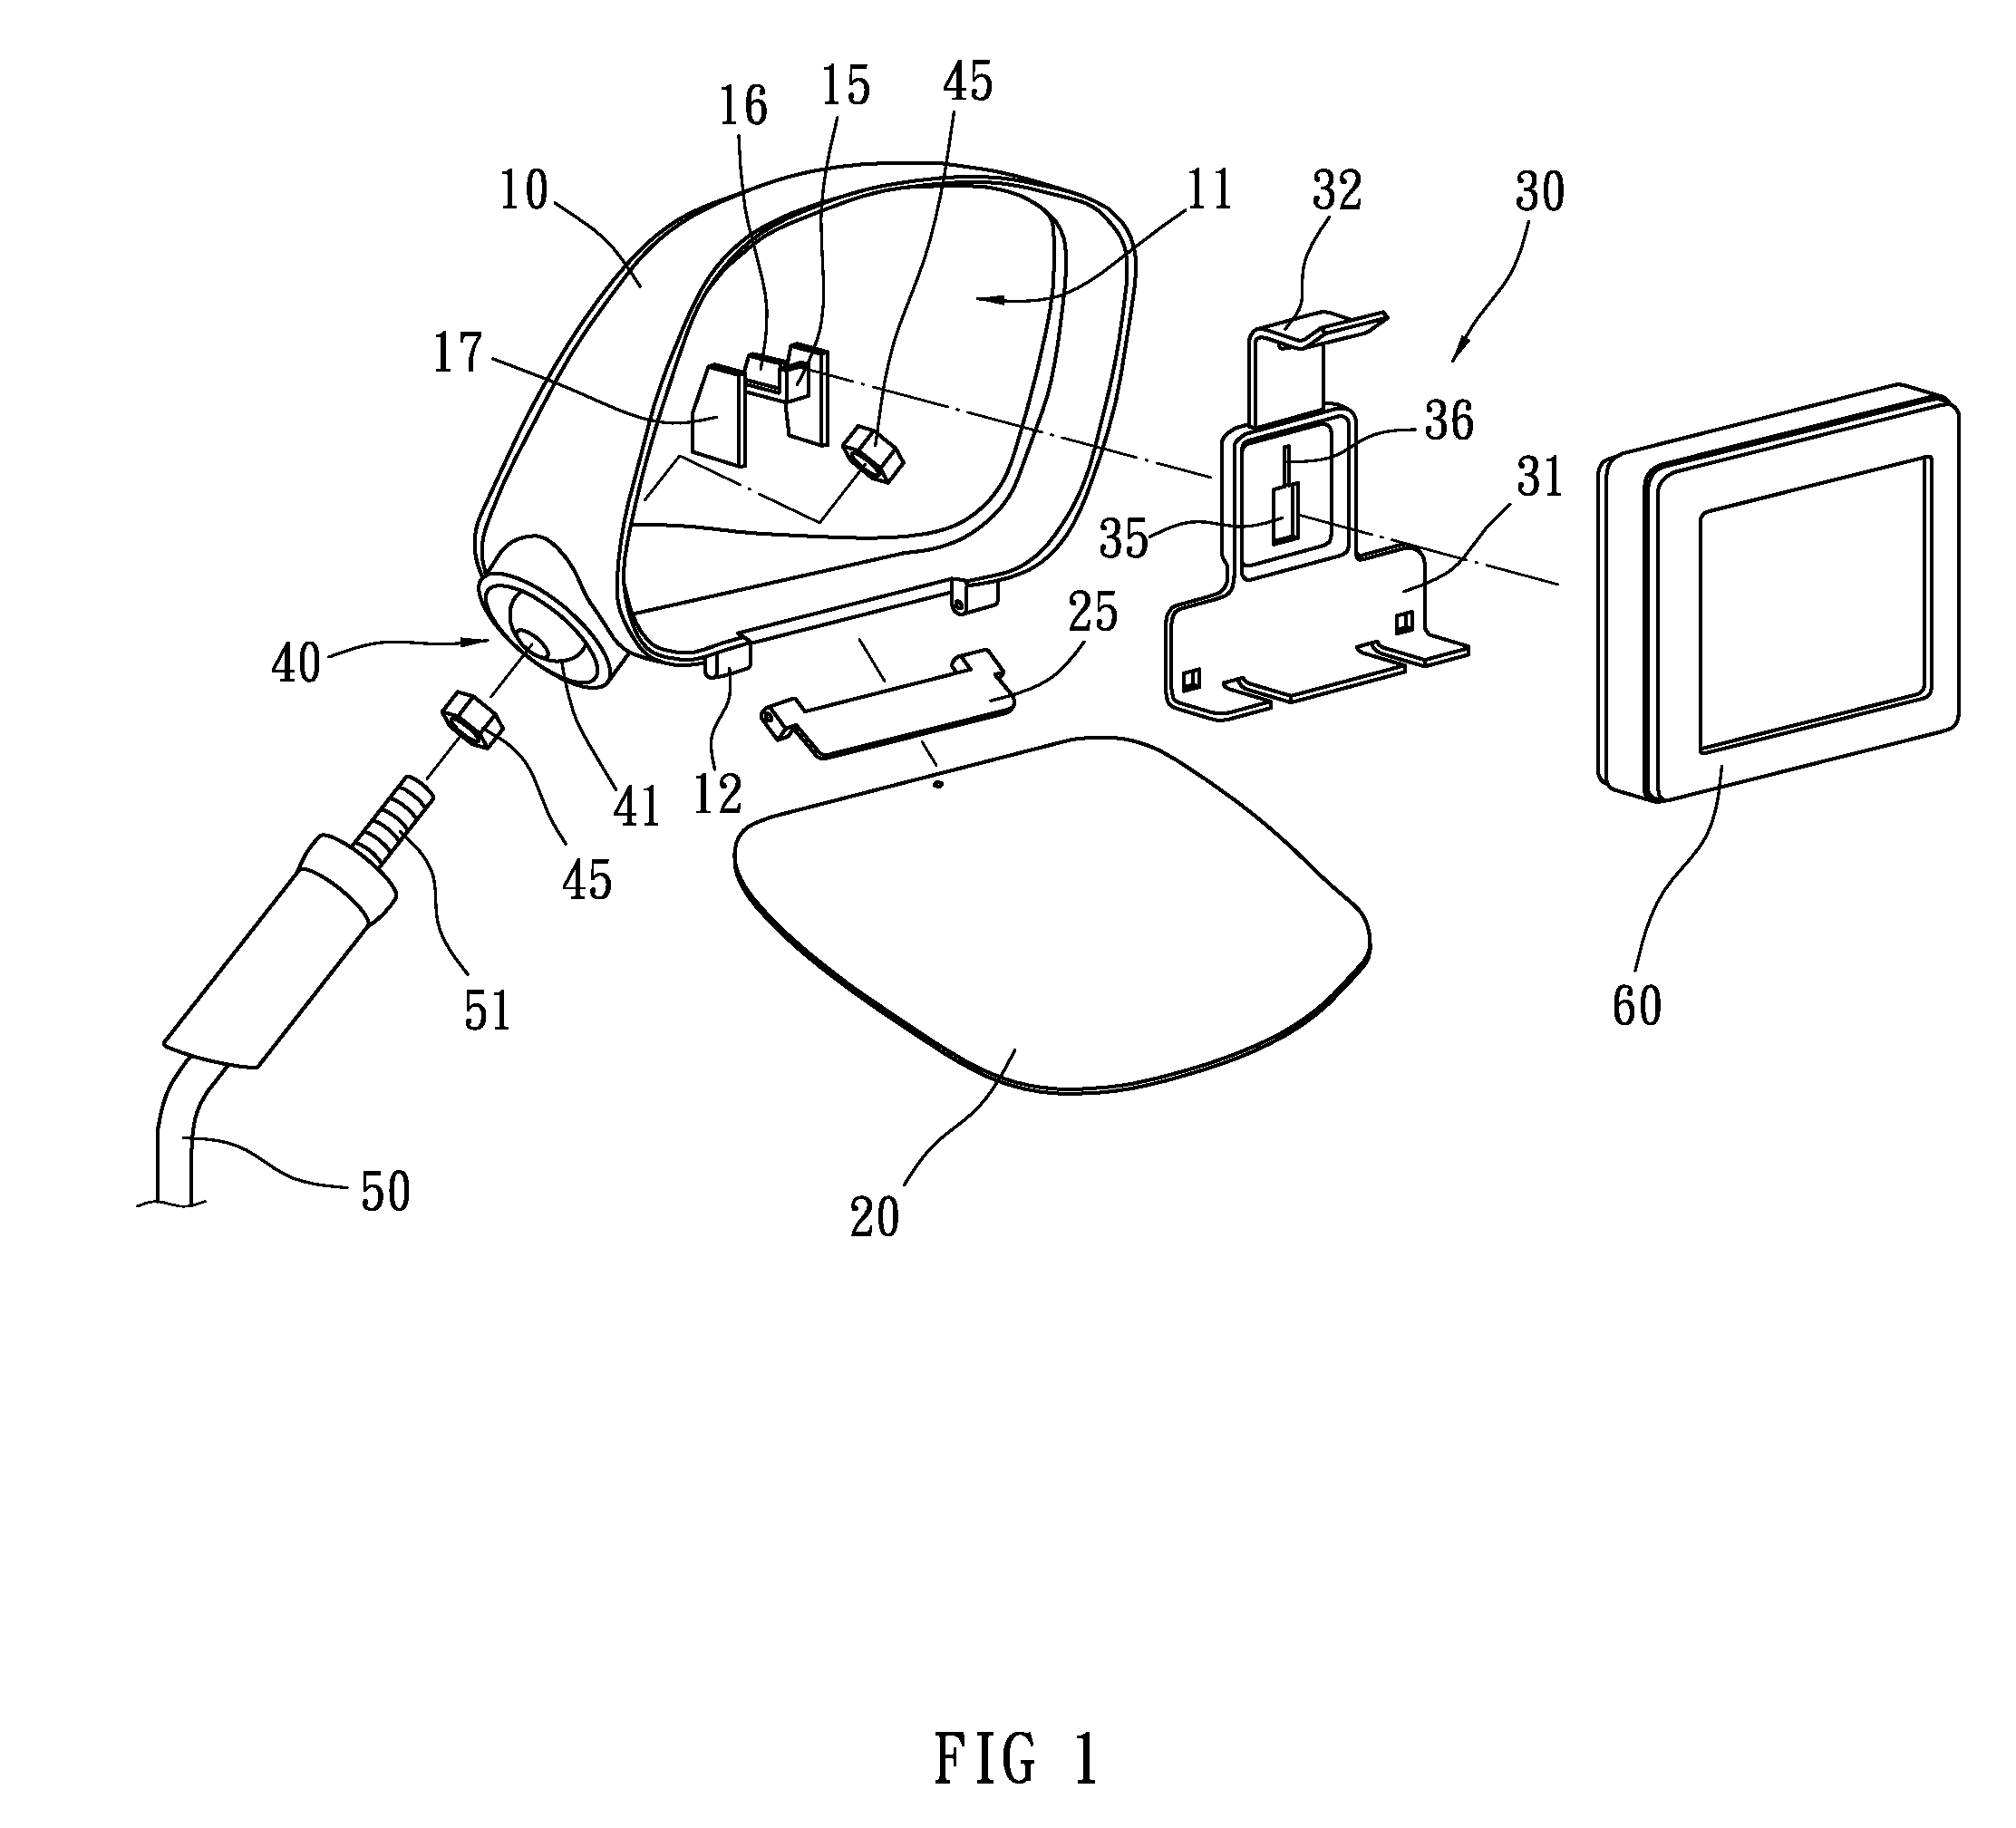 Rear-view mirror assembly